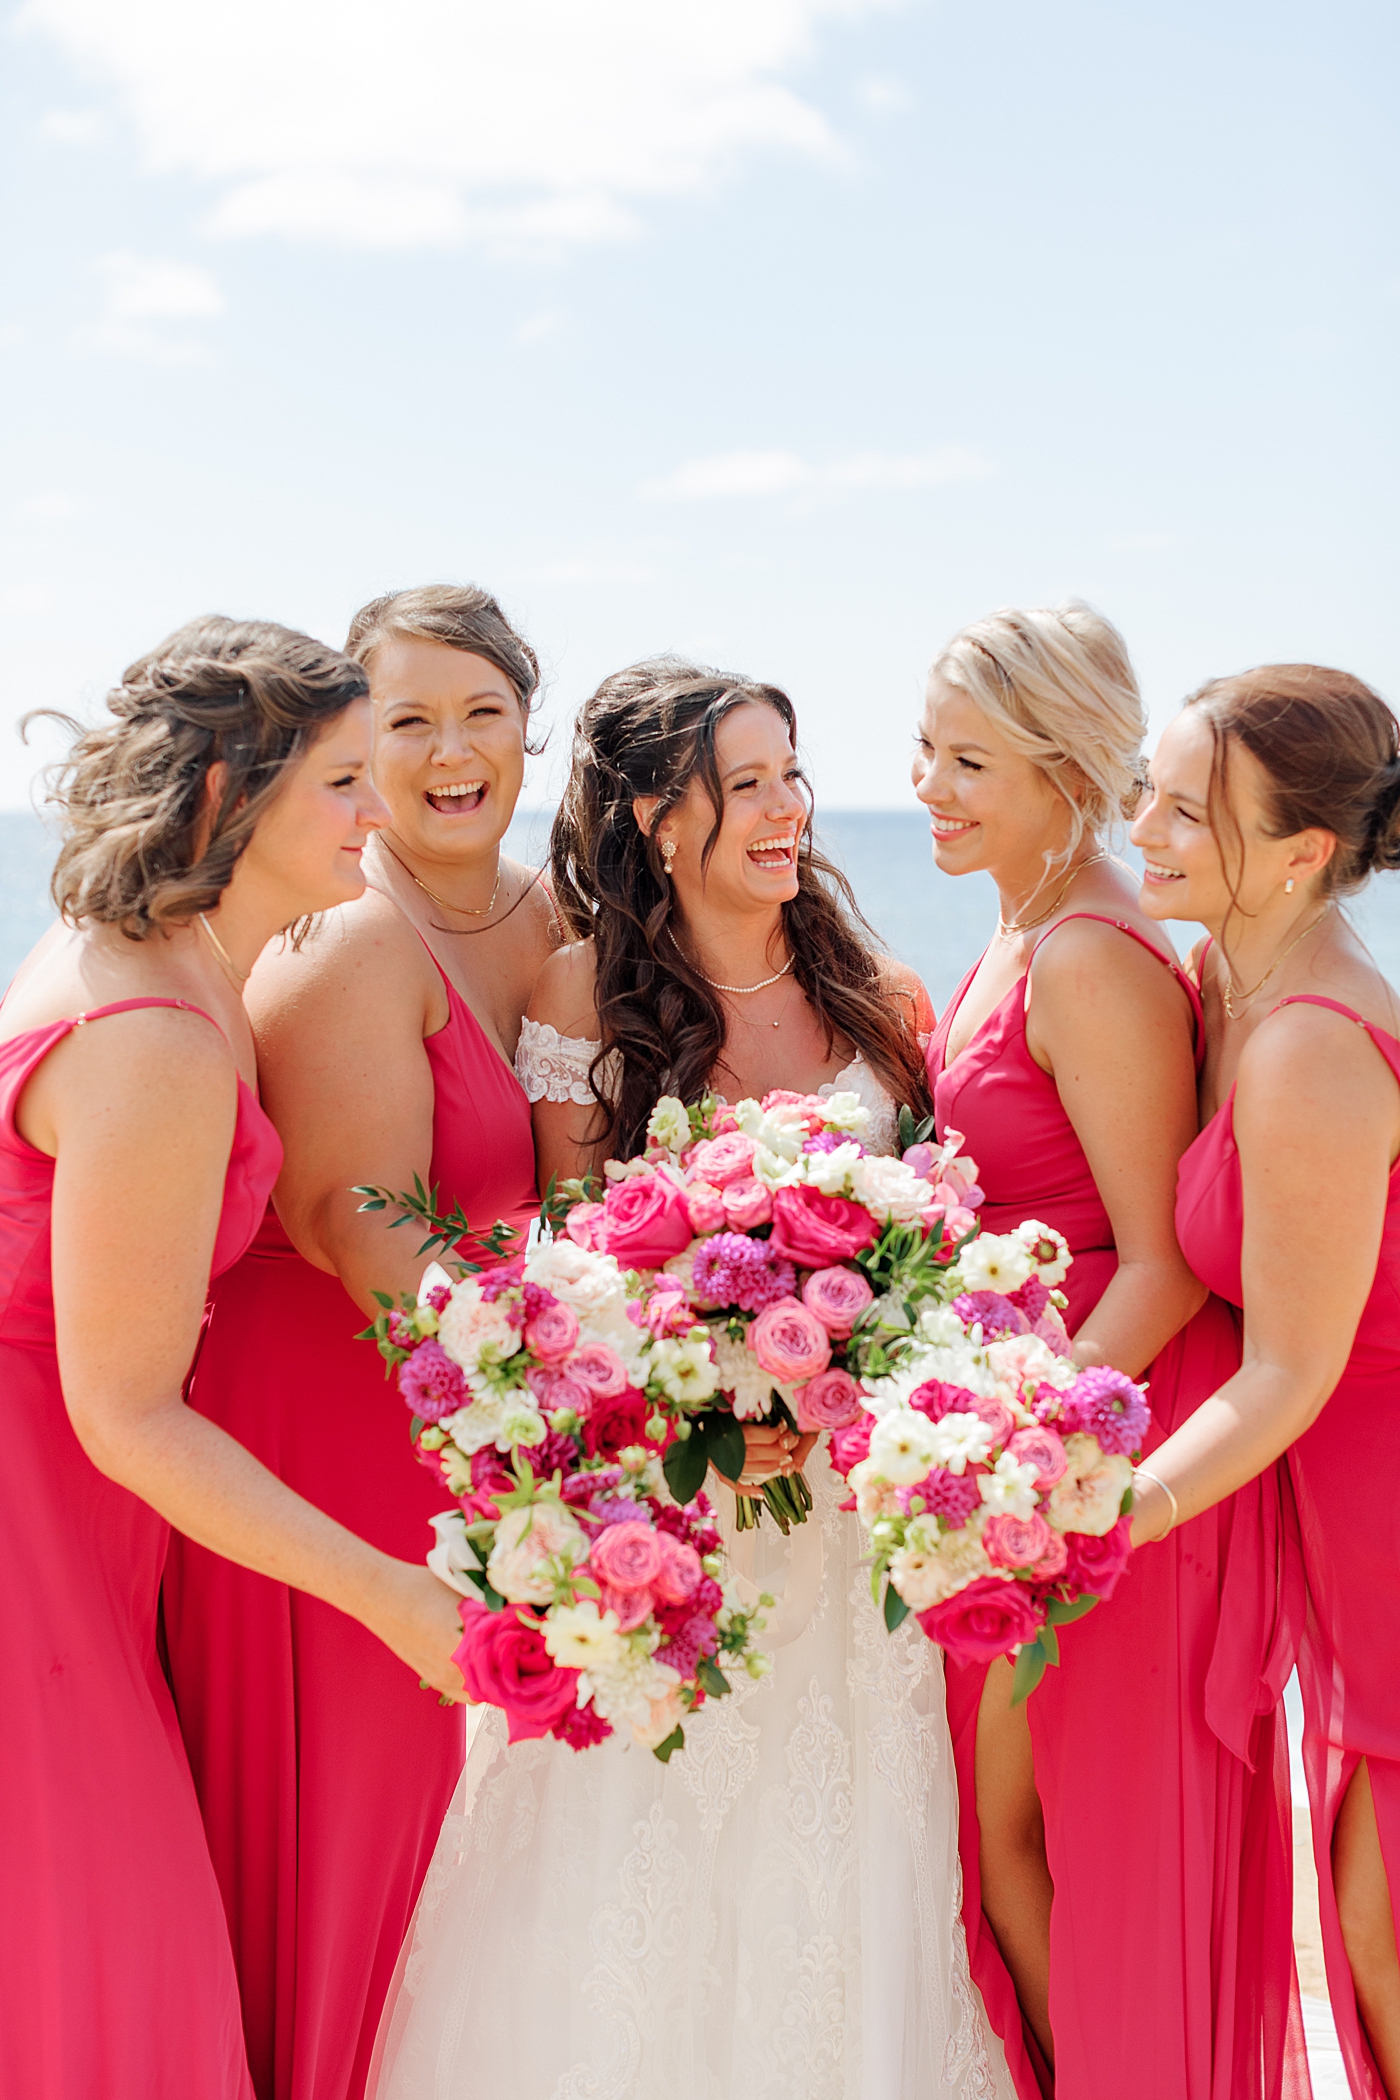 Bride and bridesmaids in bright pink laughing at each other and holding colorful bouquets | Image by Hope Helmuth Photography